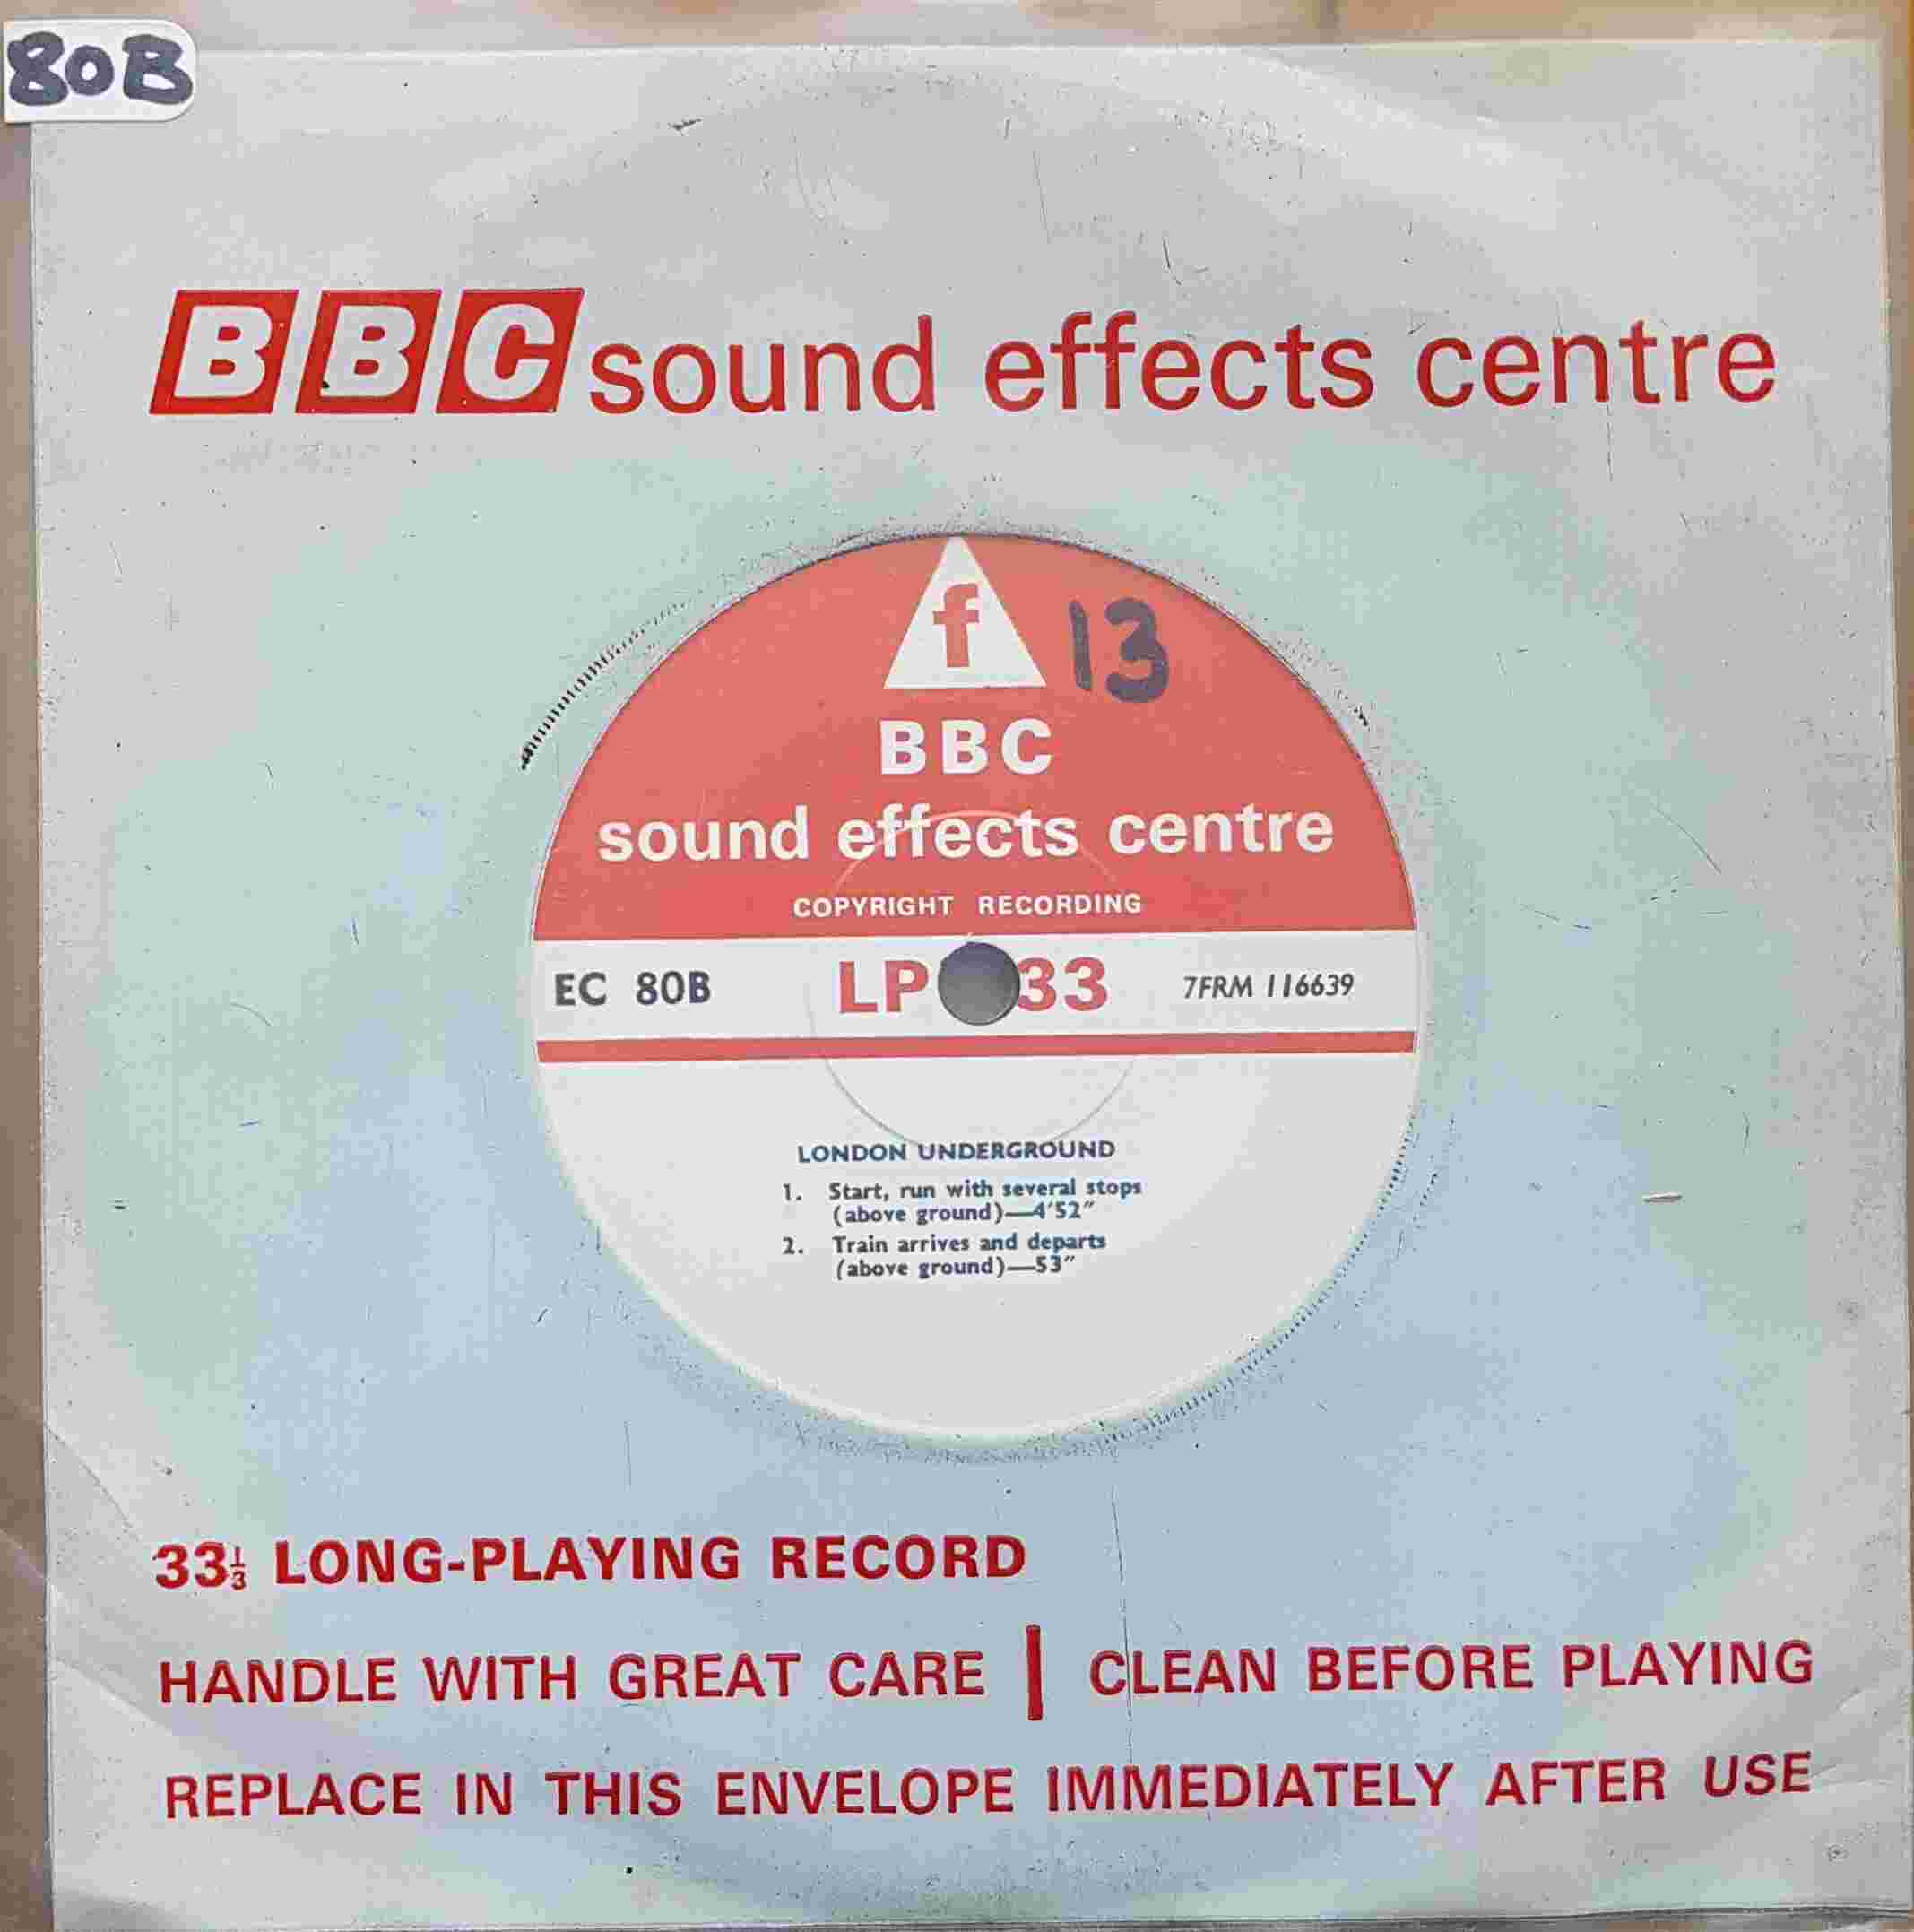 Picture of EC 80B London Underground by artist Not registered from the BBC singles - Records and Tapes library